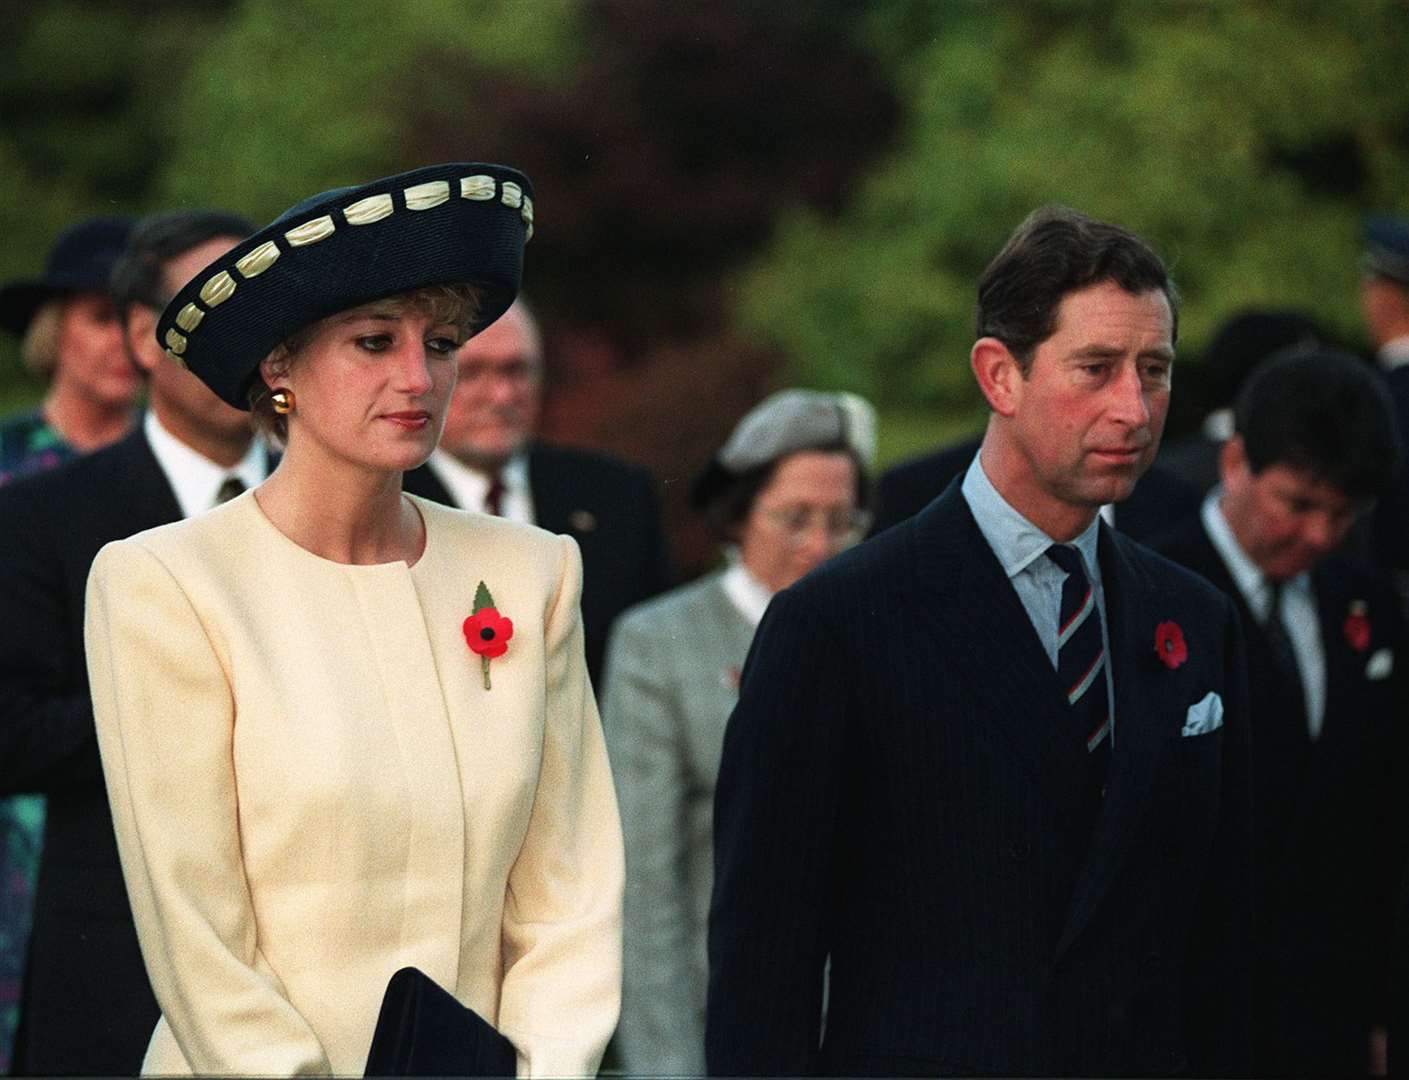 Key dates in the life of Diana, Princess of Wales